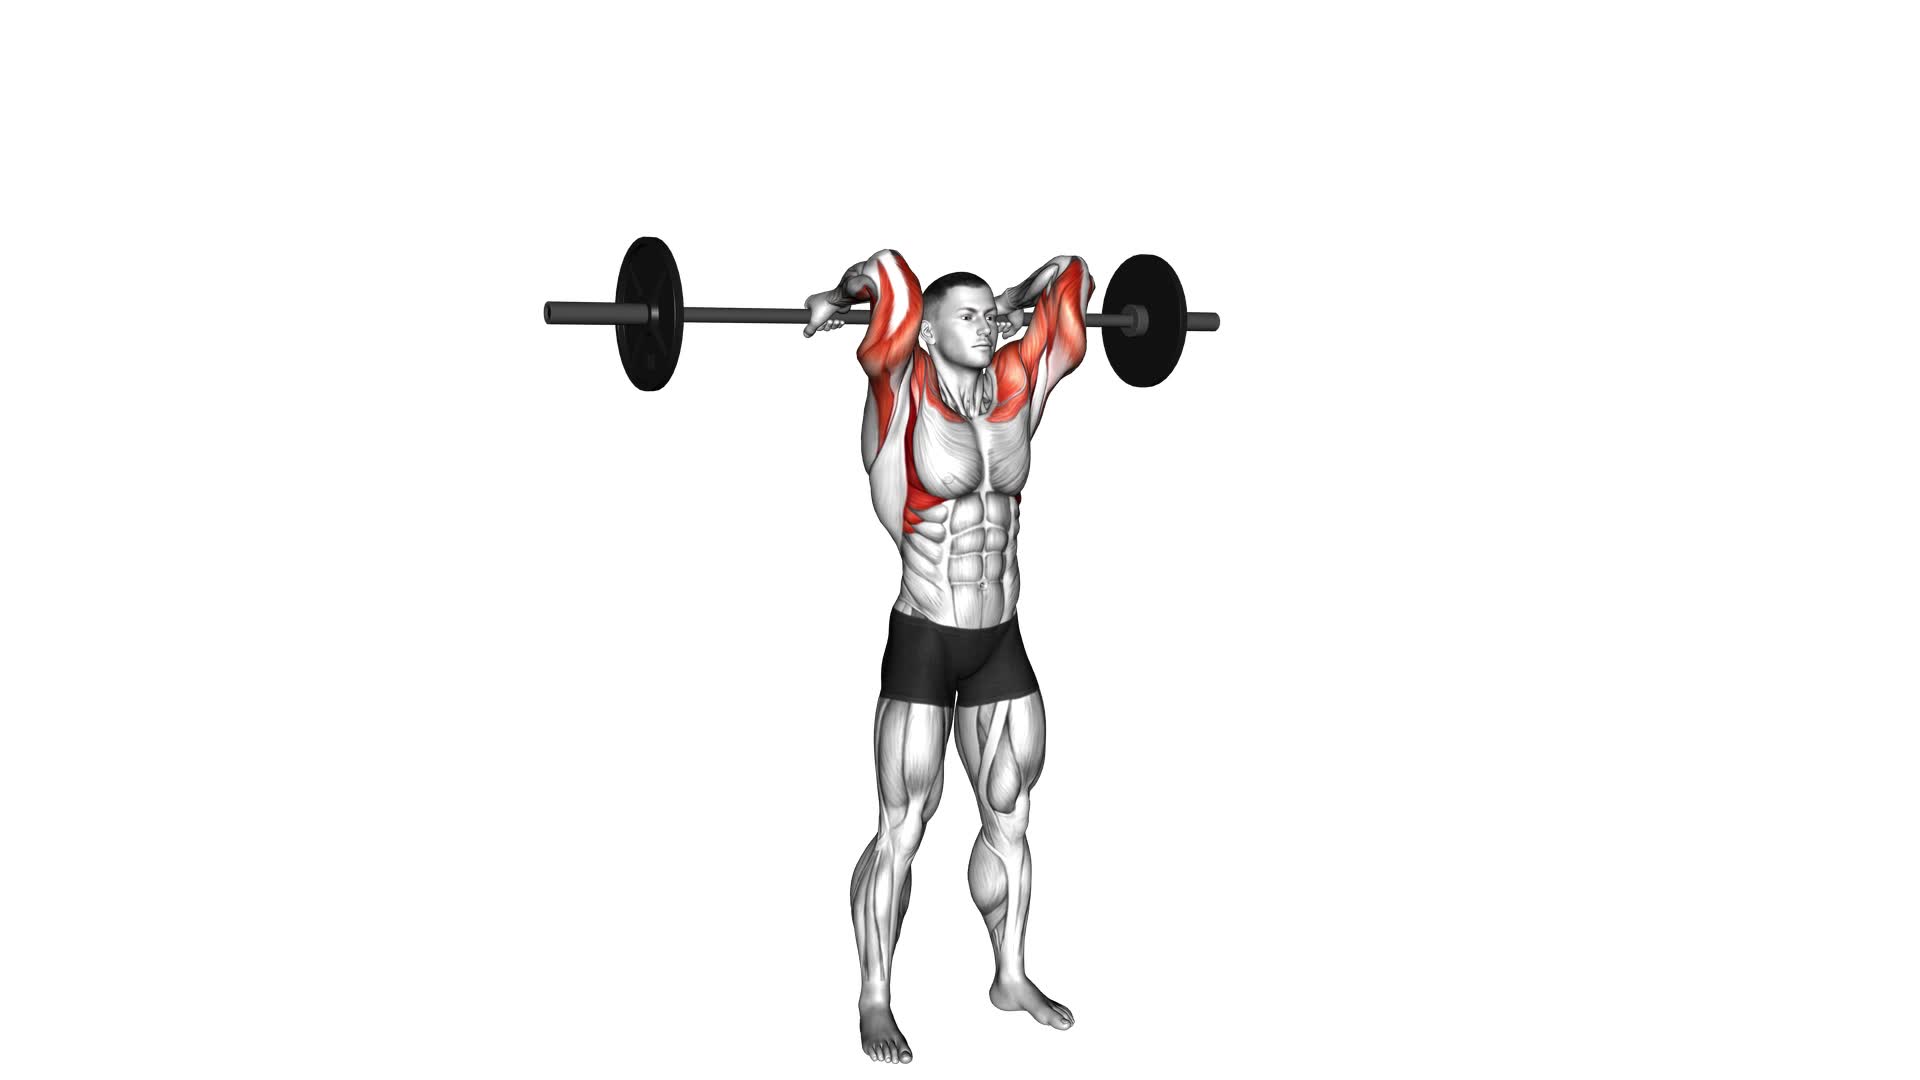 Barbell Curl Press Extension (male) - Video Exercise Guide & Tips